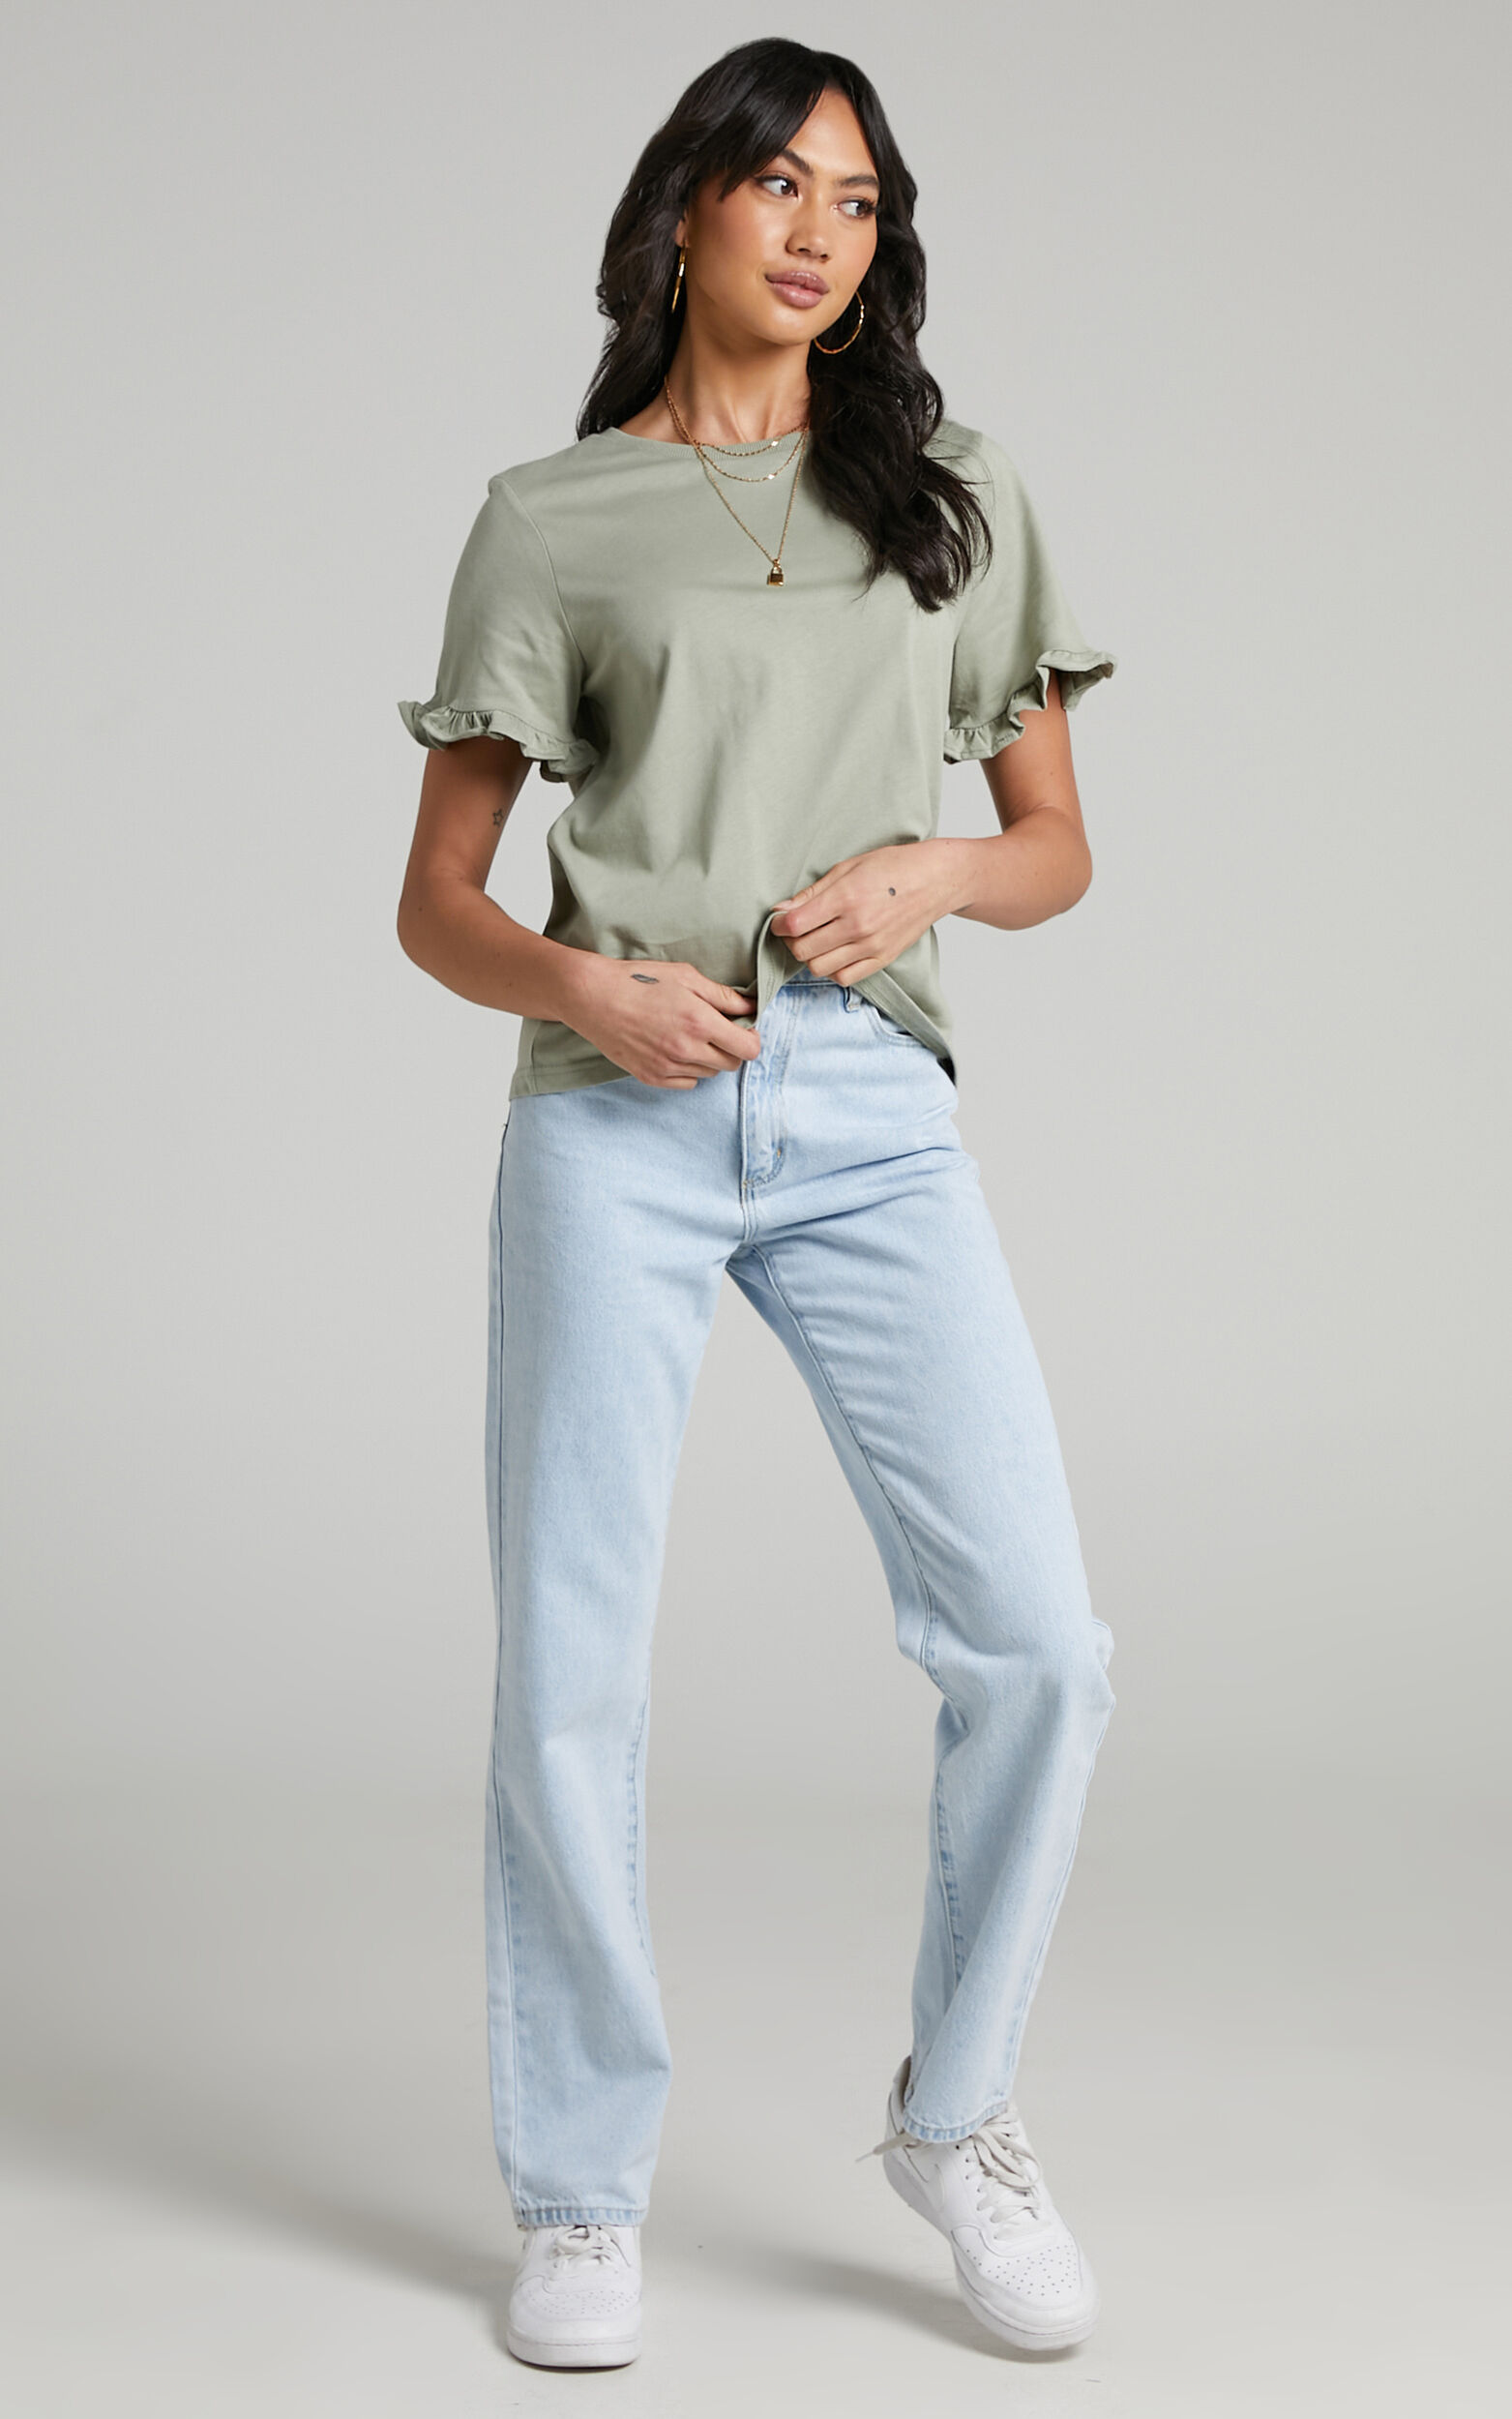 Closer To Home Ruffle Sleeve Tee in Sage - 04, GRN1, super-hi-res image number null